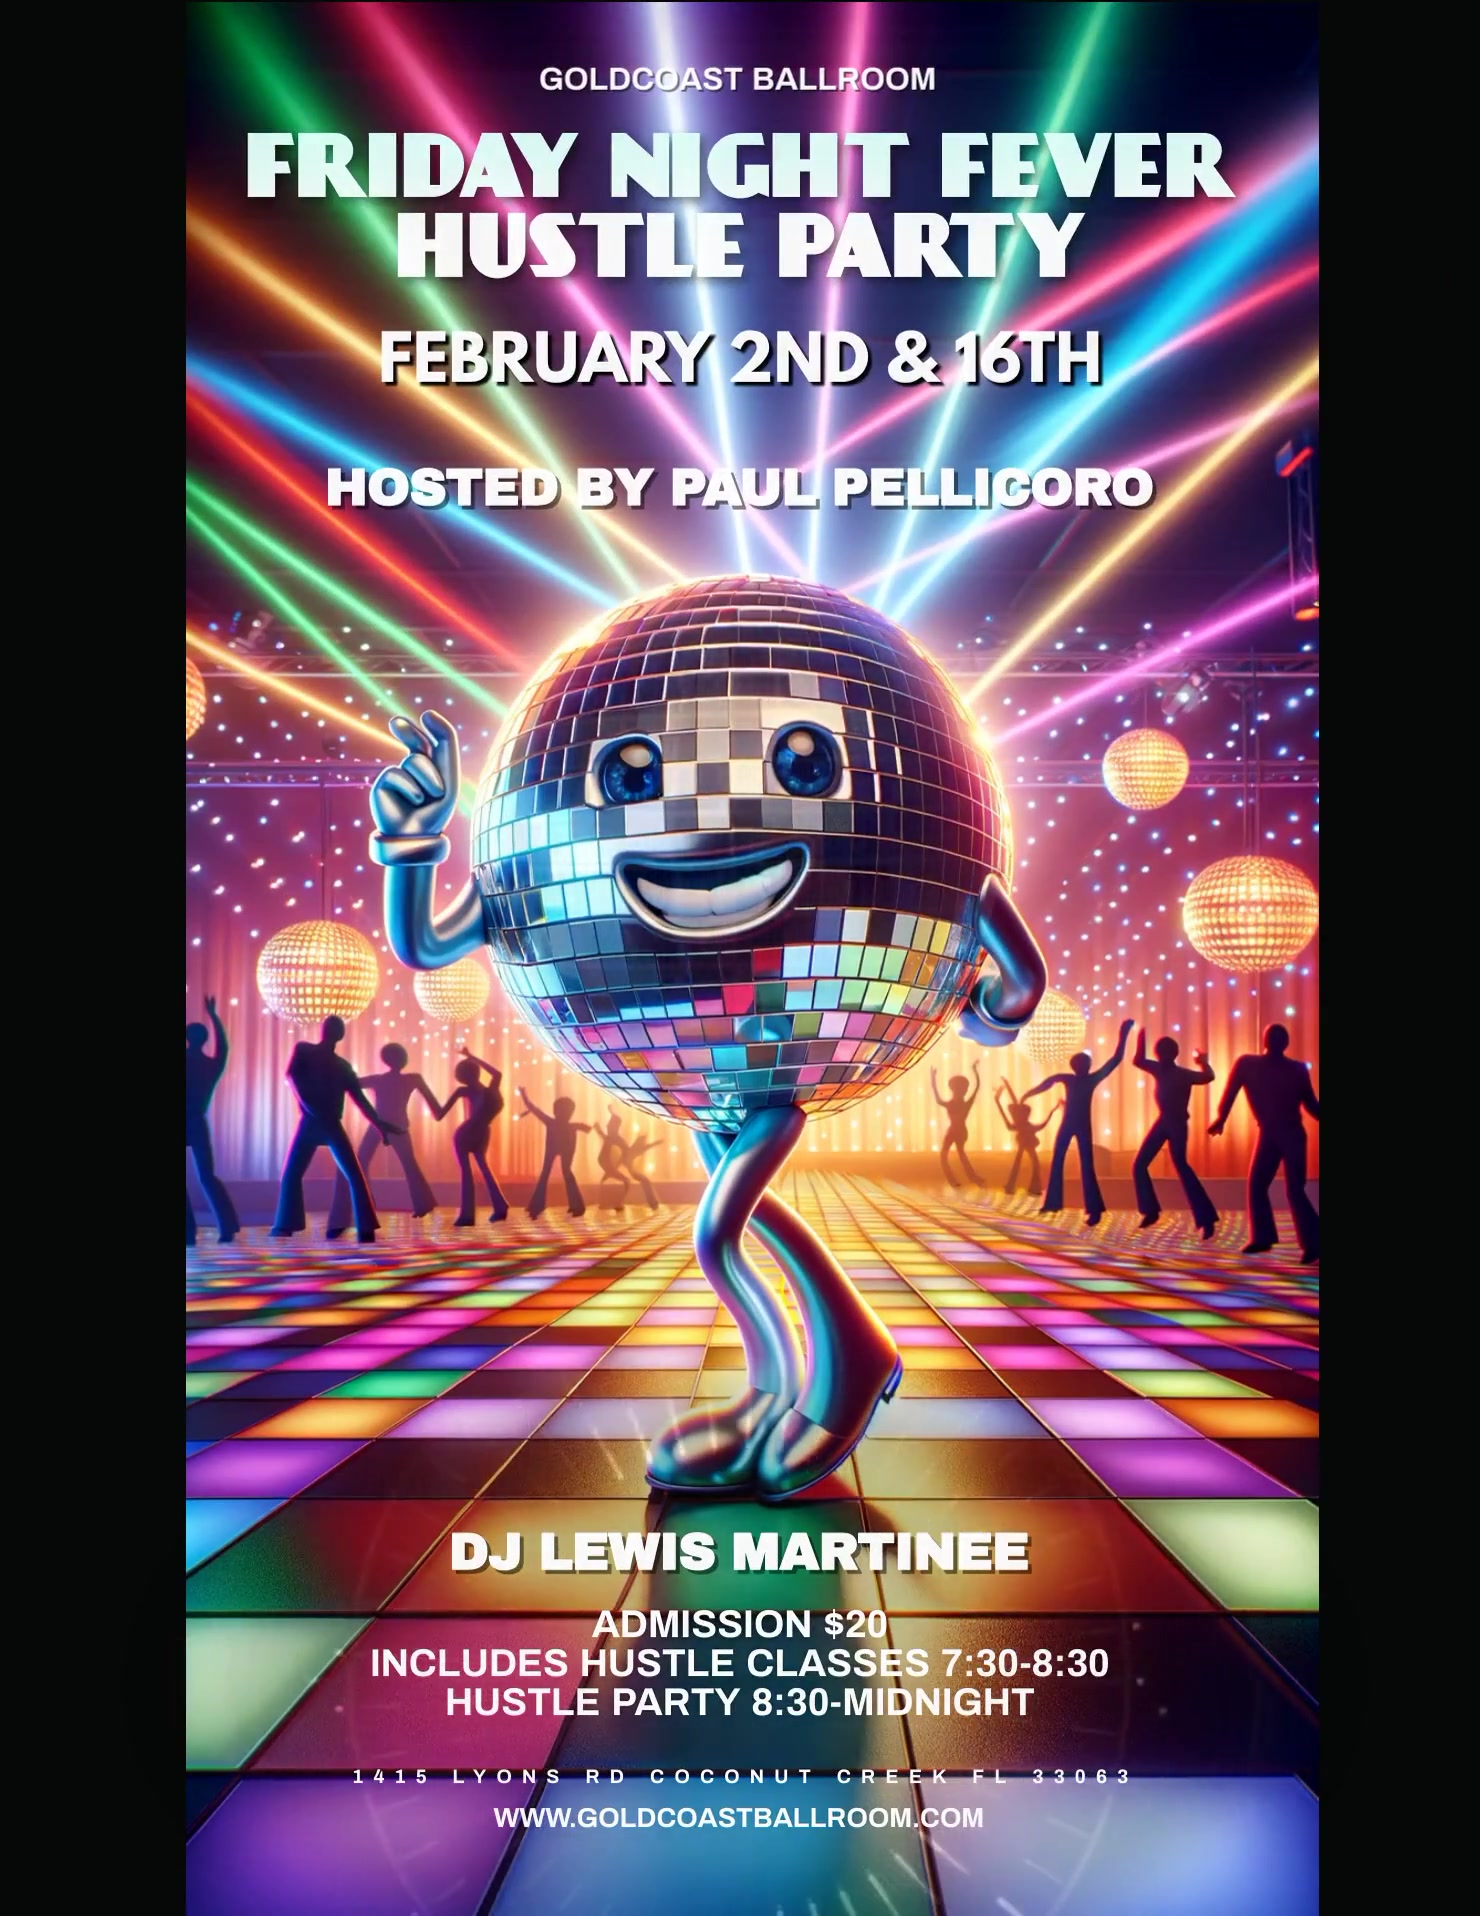 FEBRUARY 2 and 16 - HUSTLE PARTY!